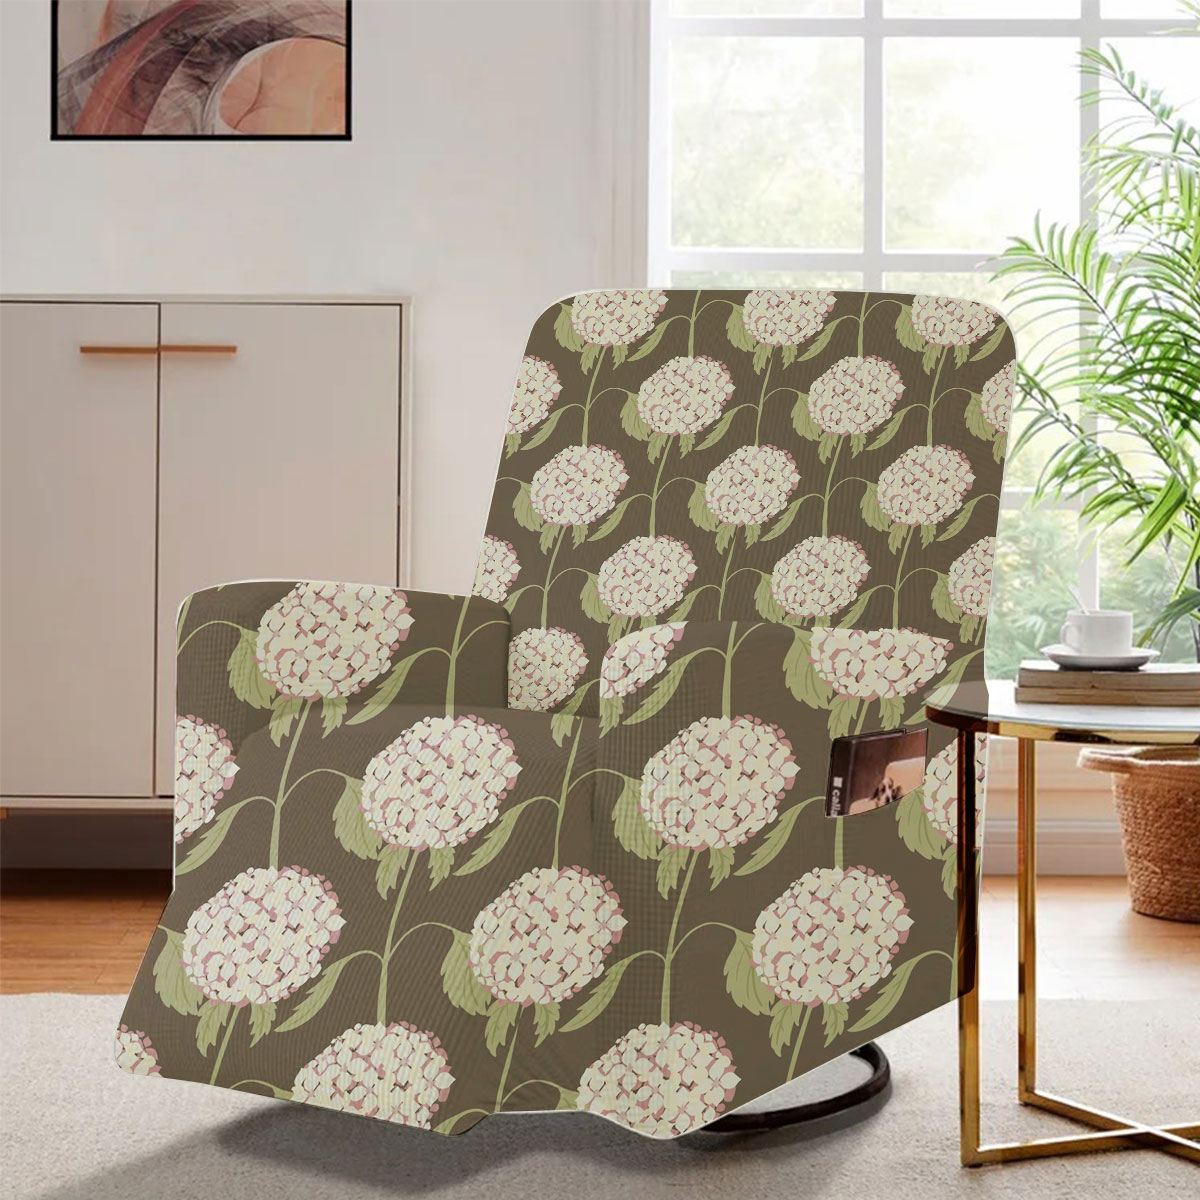 Abstract Nature With White Hydrangea Flowers Recliner Slipcover